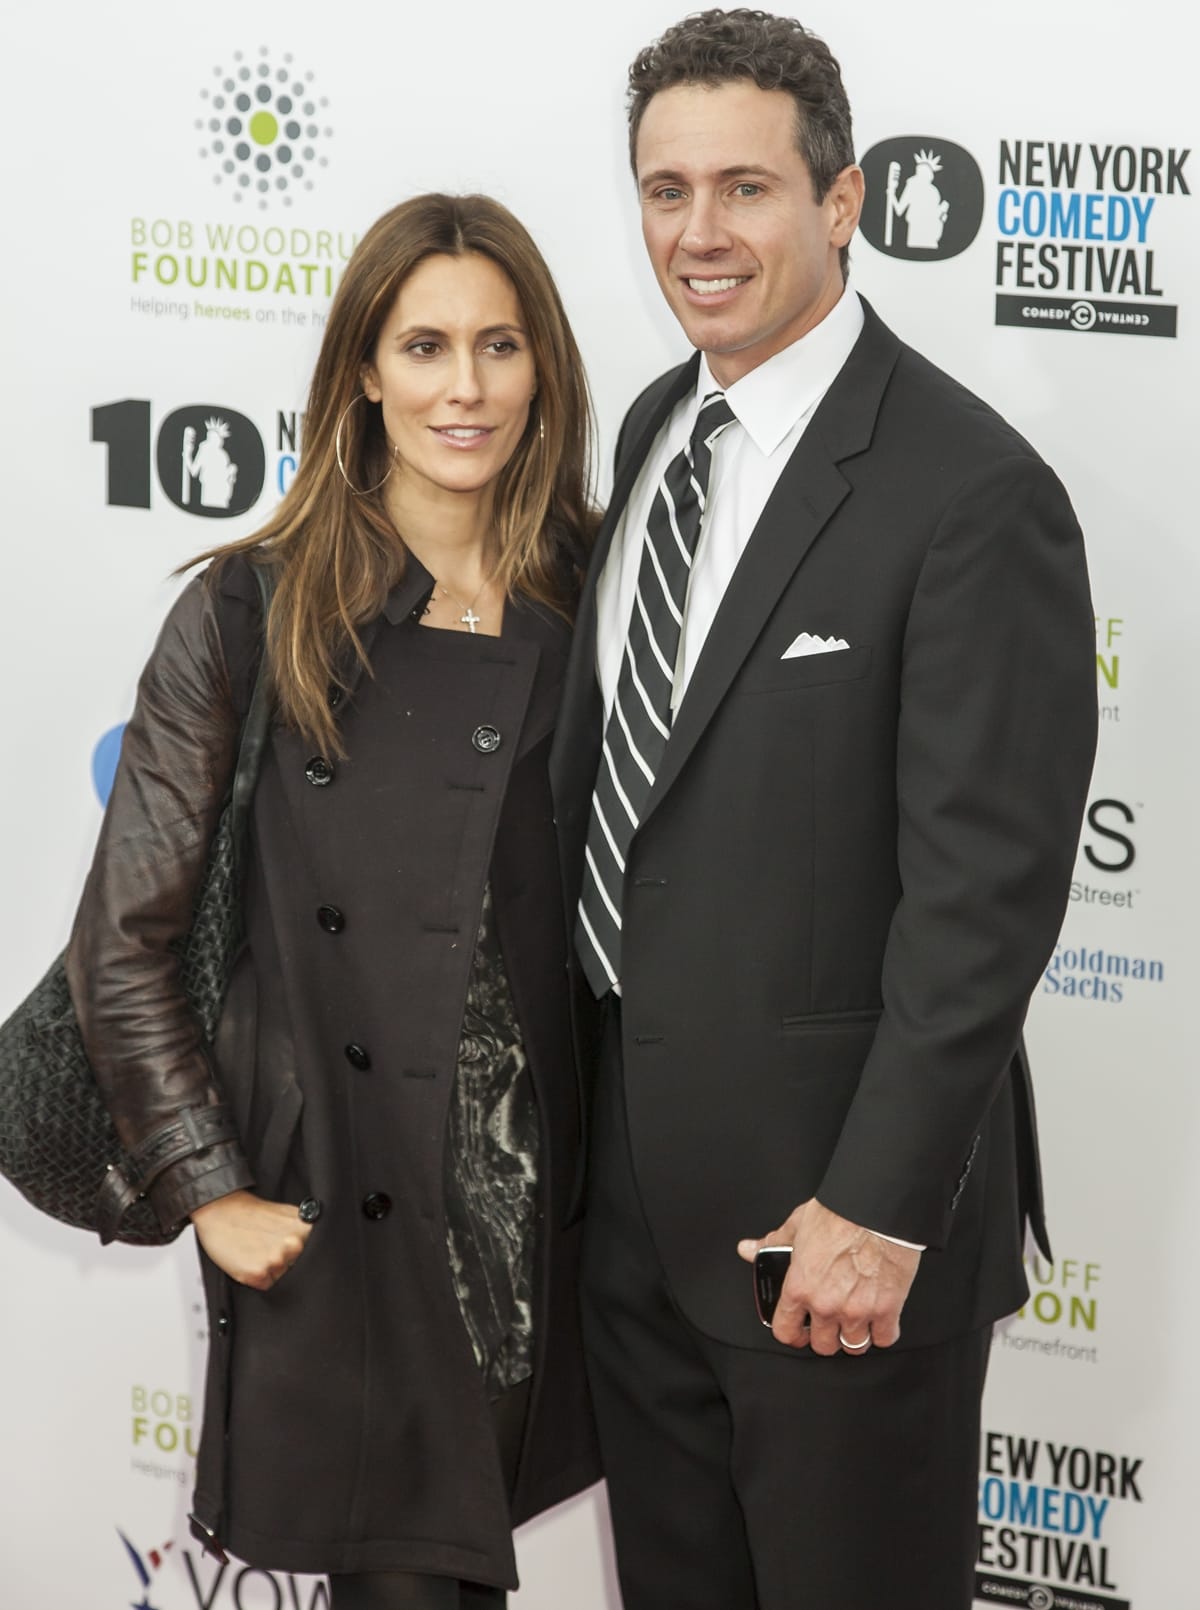 Cristina Greeven Cuomo and Chris Cuomo married in 2001 and are the parents of three children